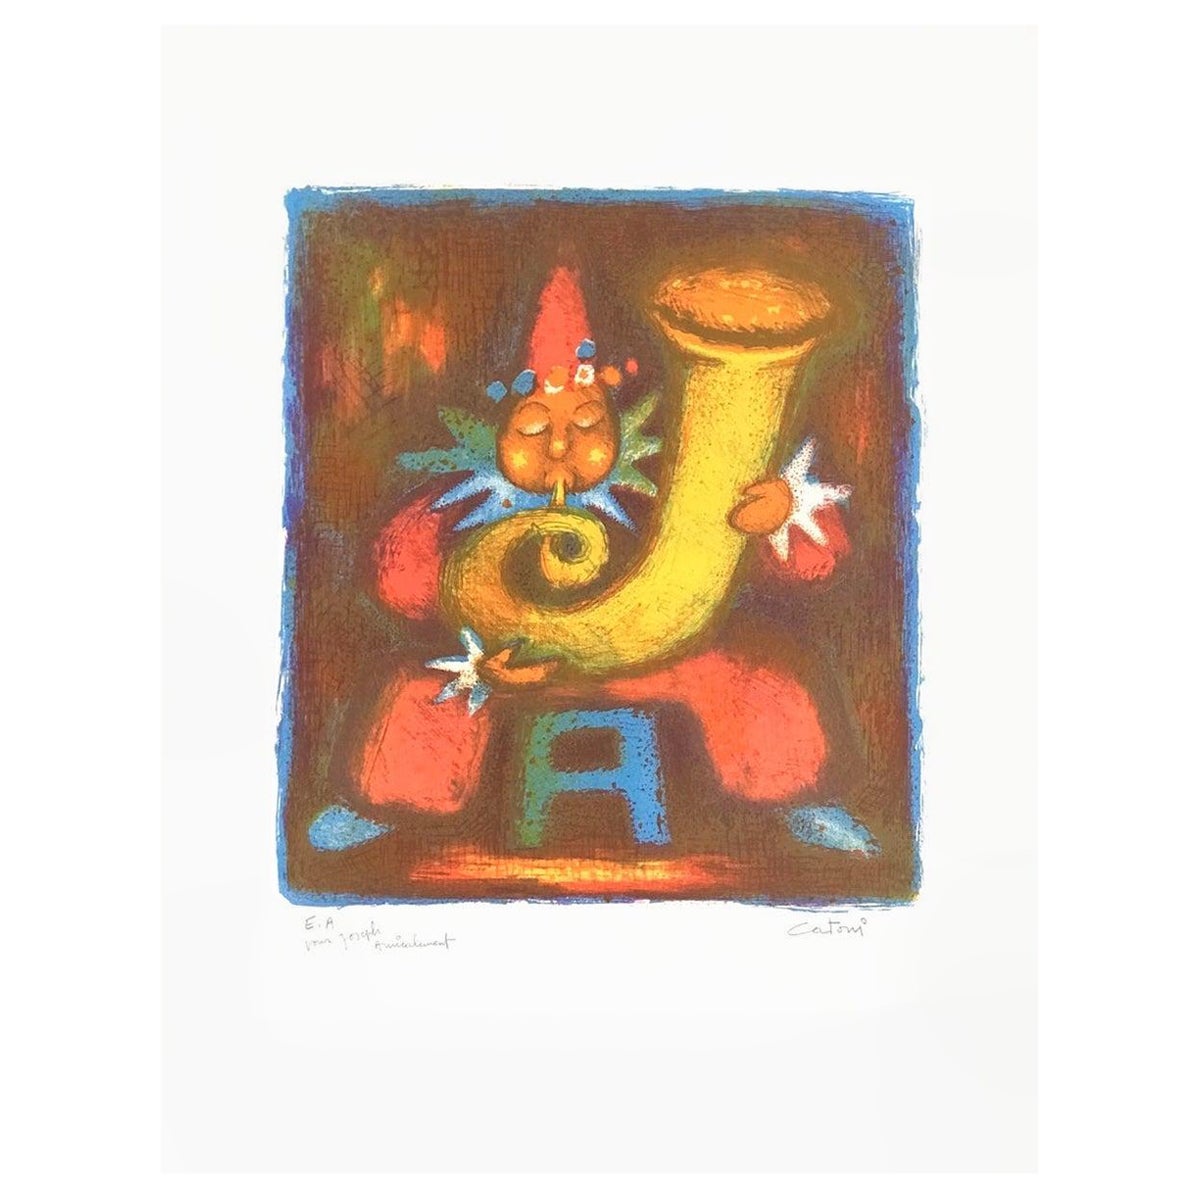 CLOWN TUBA PLAYER Signed Lithograph, Circus Clown Portrait, Red, Yellow, Blue - Print by Unknown